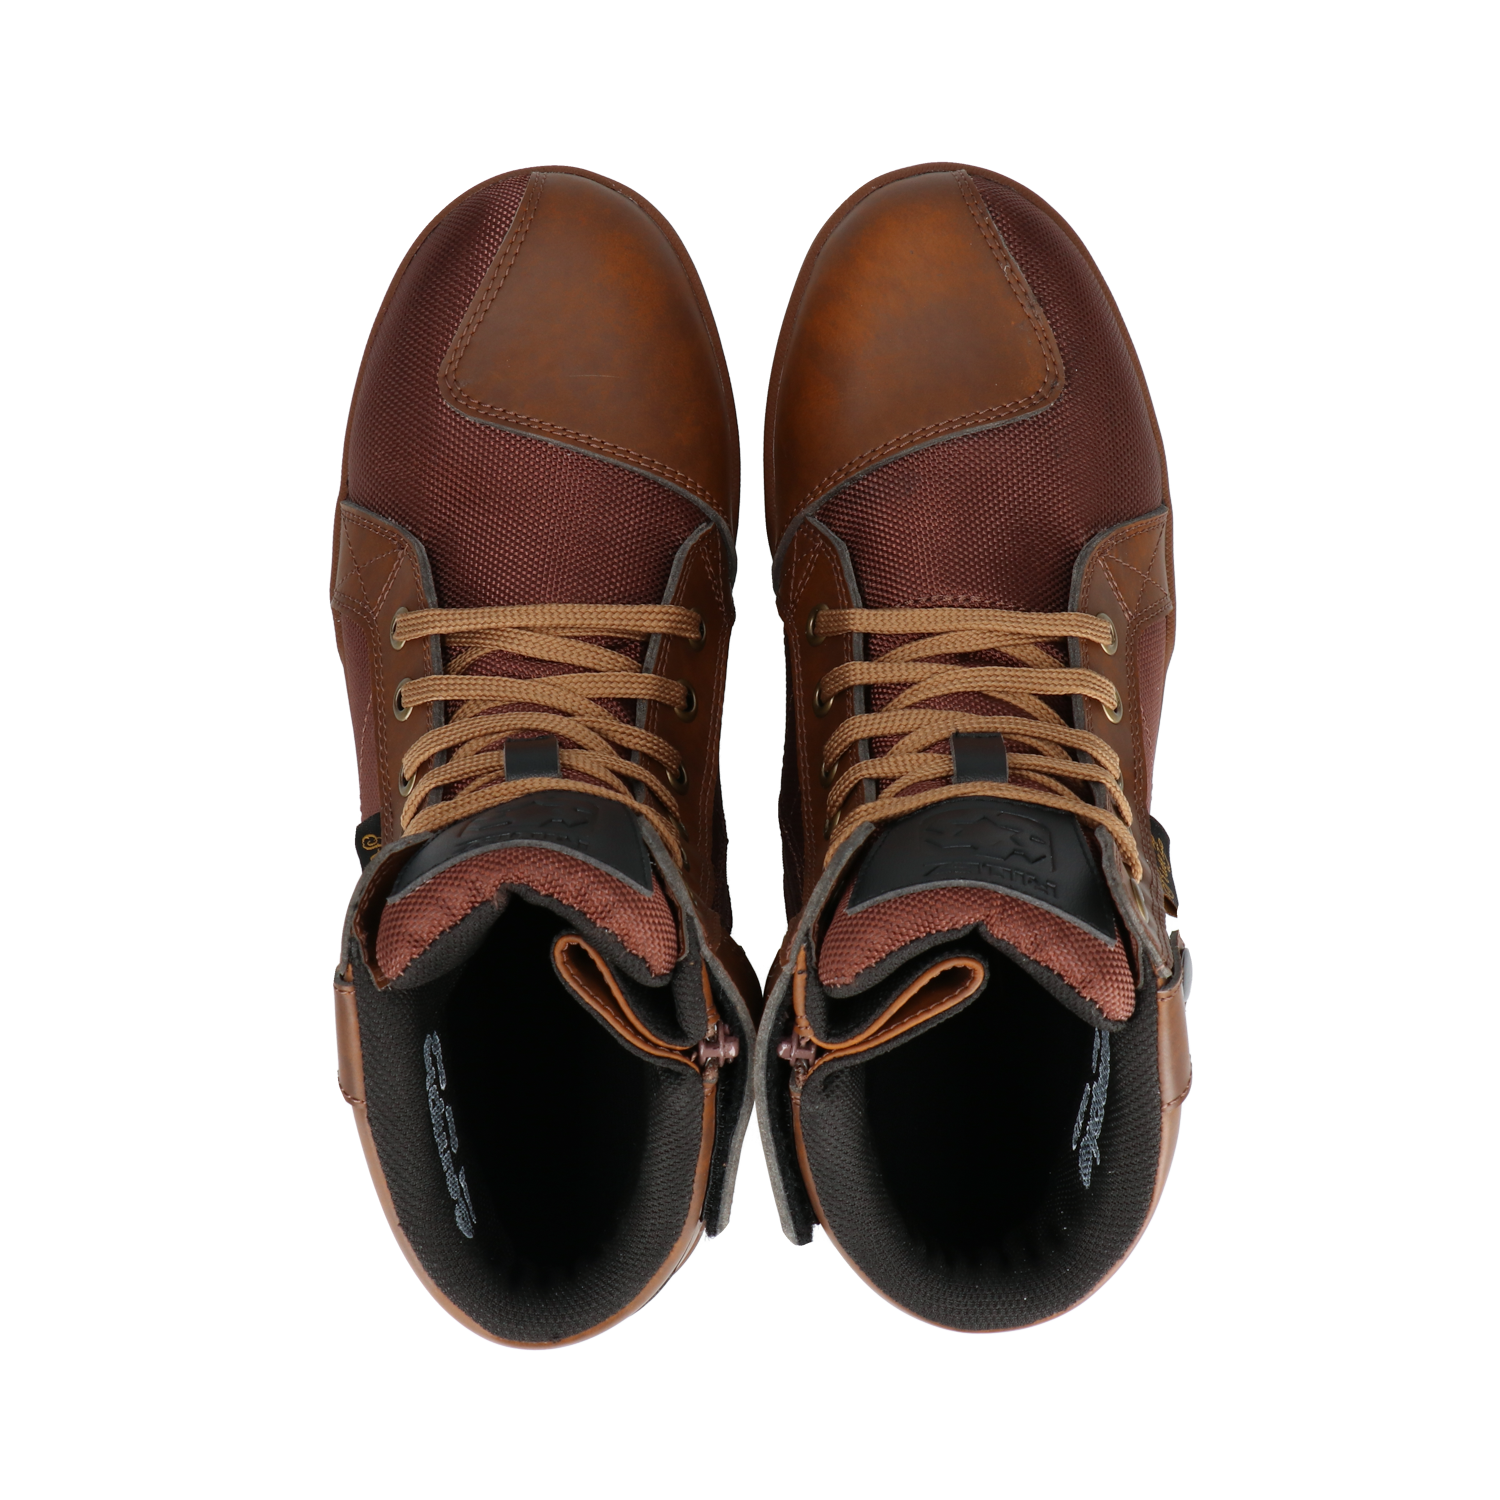 RIDEZ SNEAKERS MOTO-AW BROWN Riding Shoes